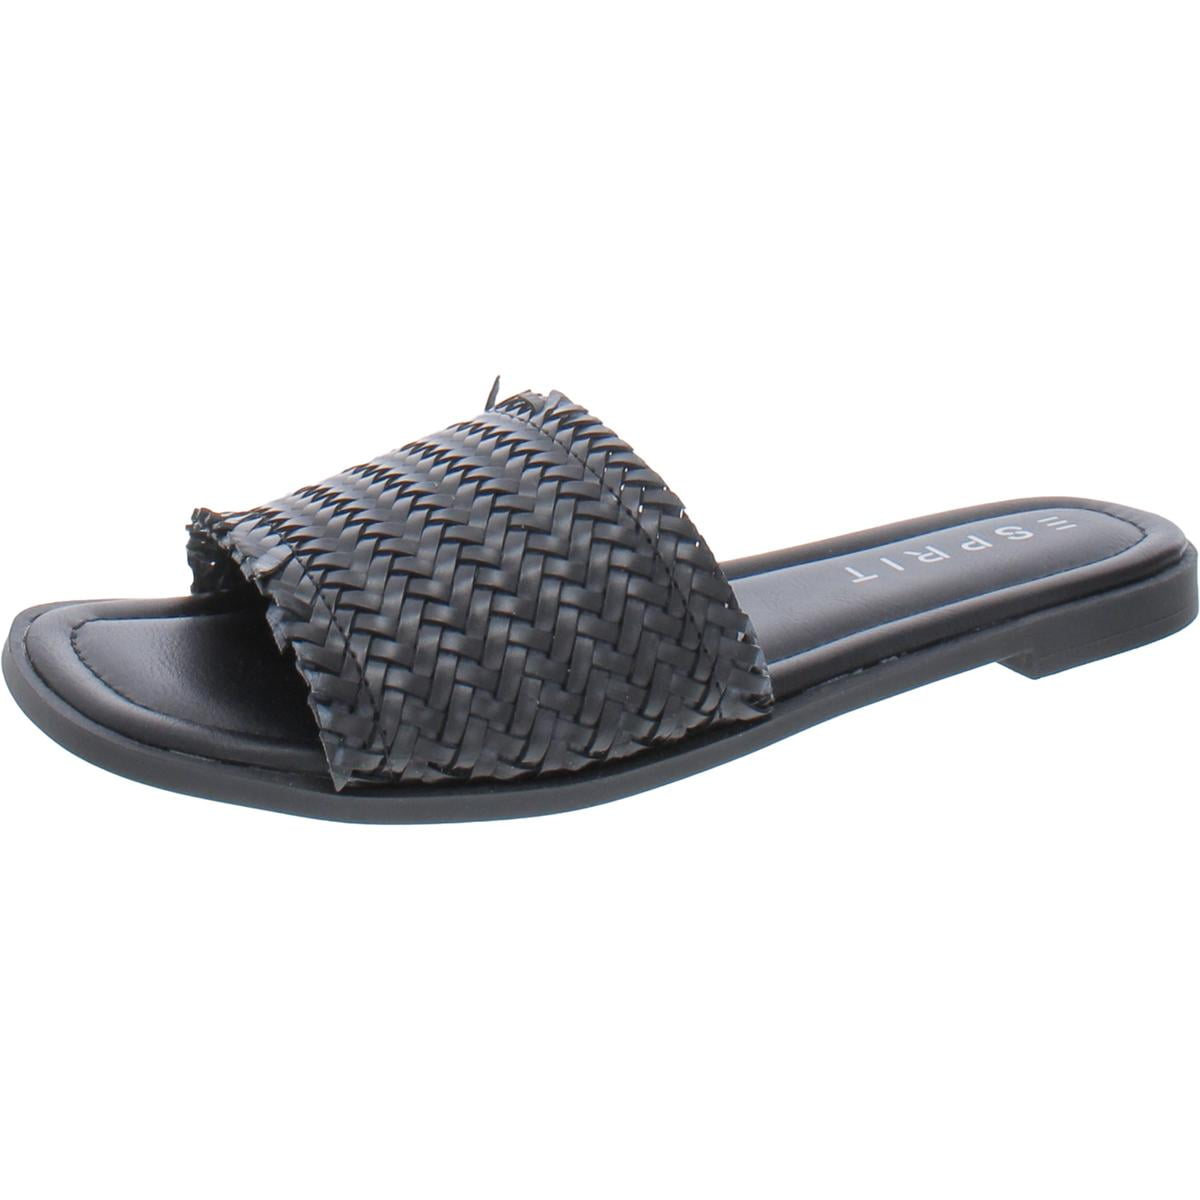 ESPRIT Womens Black Woven Breathable Padded Summer Round Toe Slip On Slide  Sandals Shoes 7 